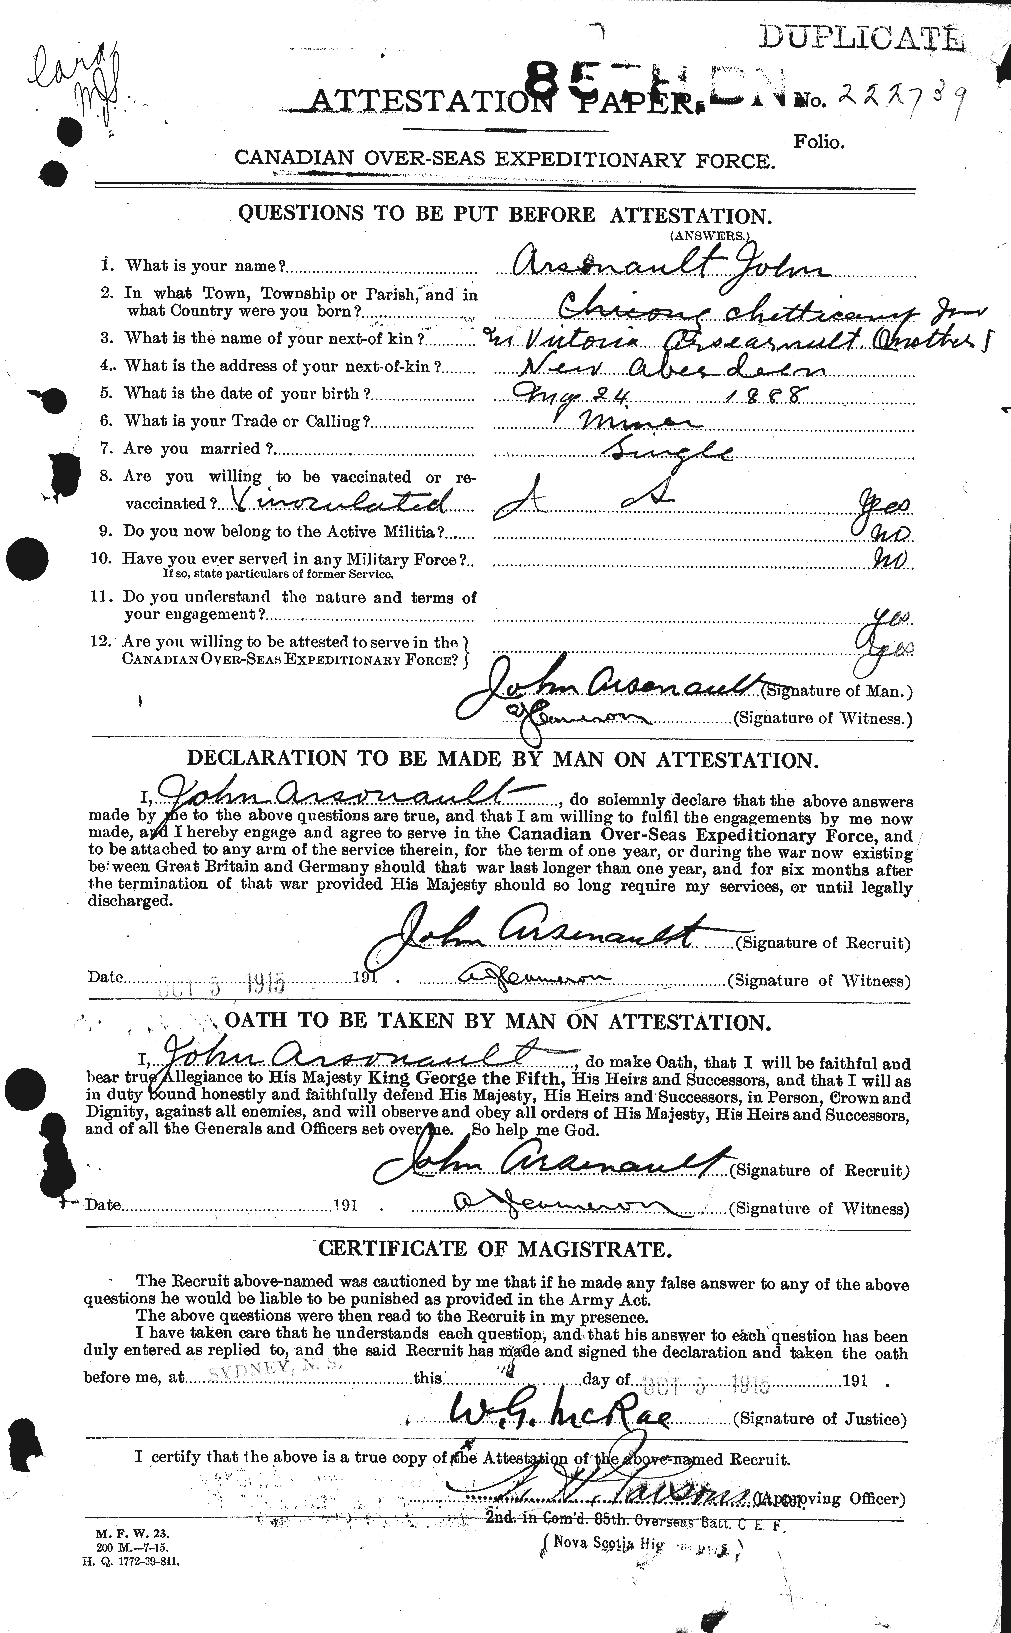 Personnel Records of the First World War - CEF 214132a